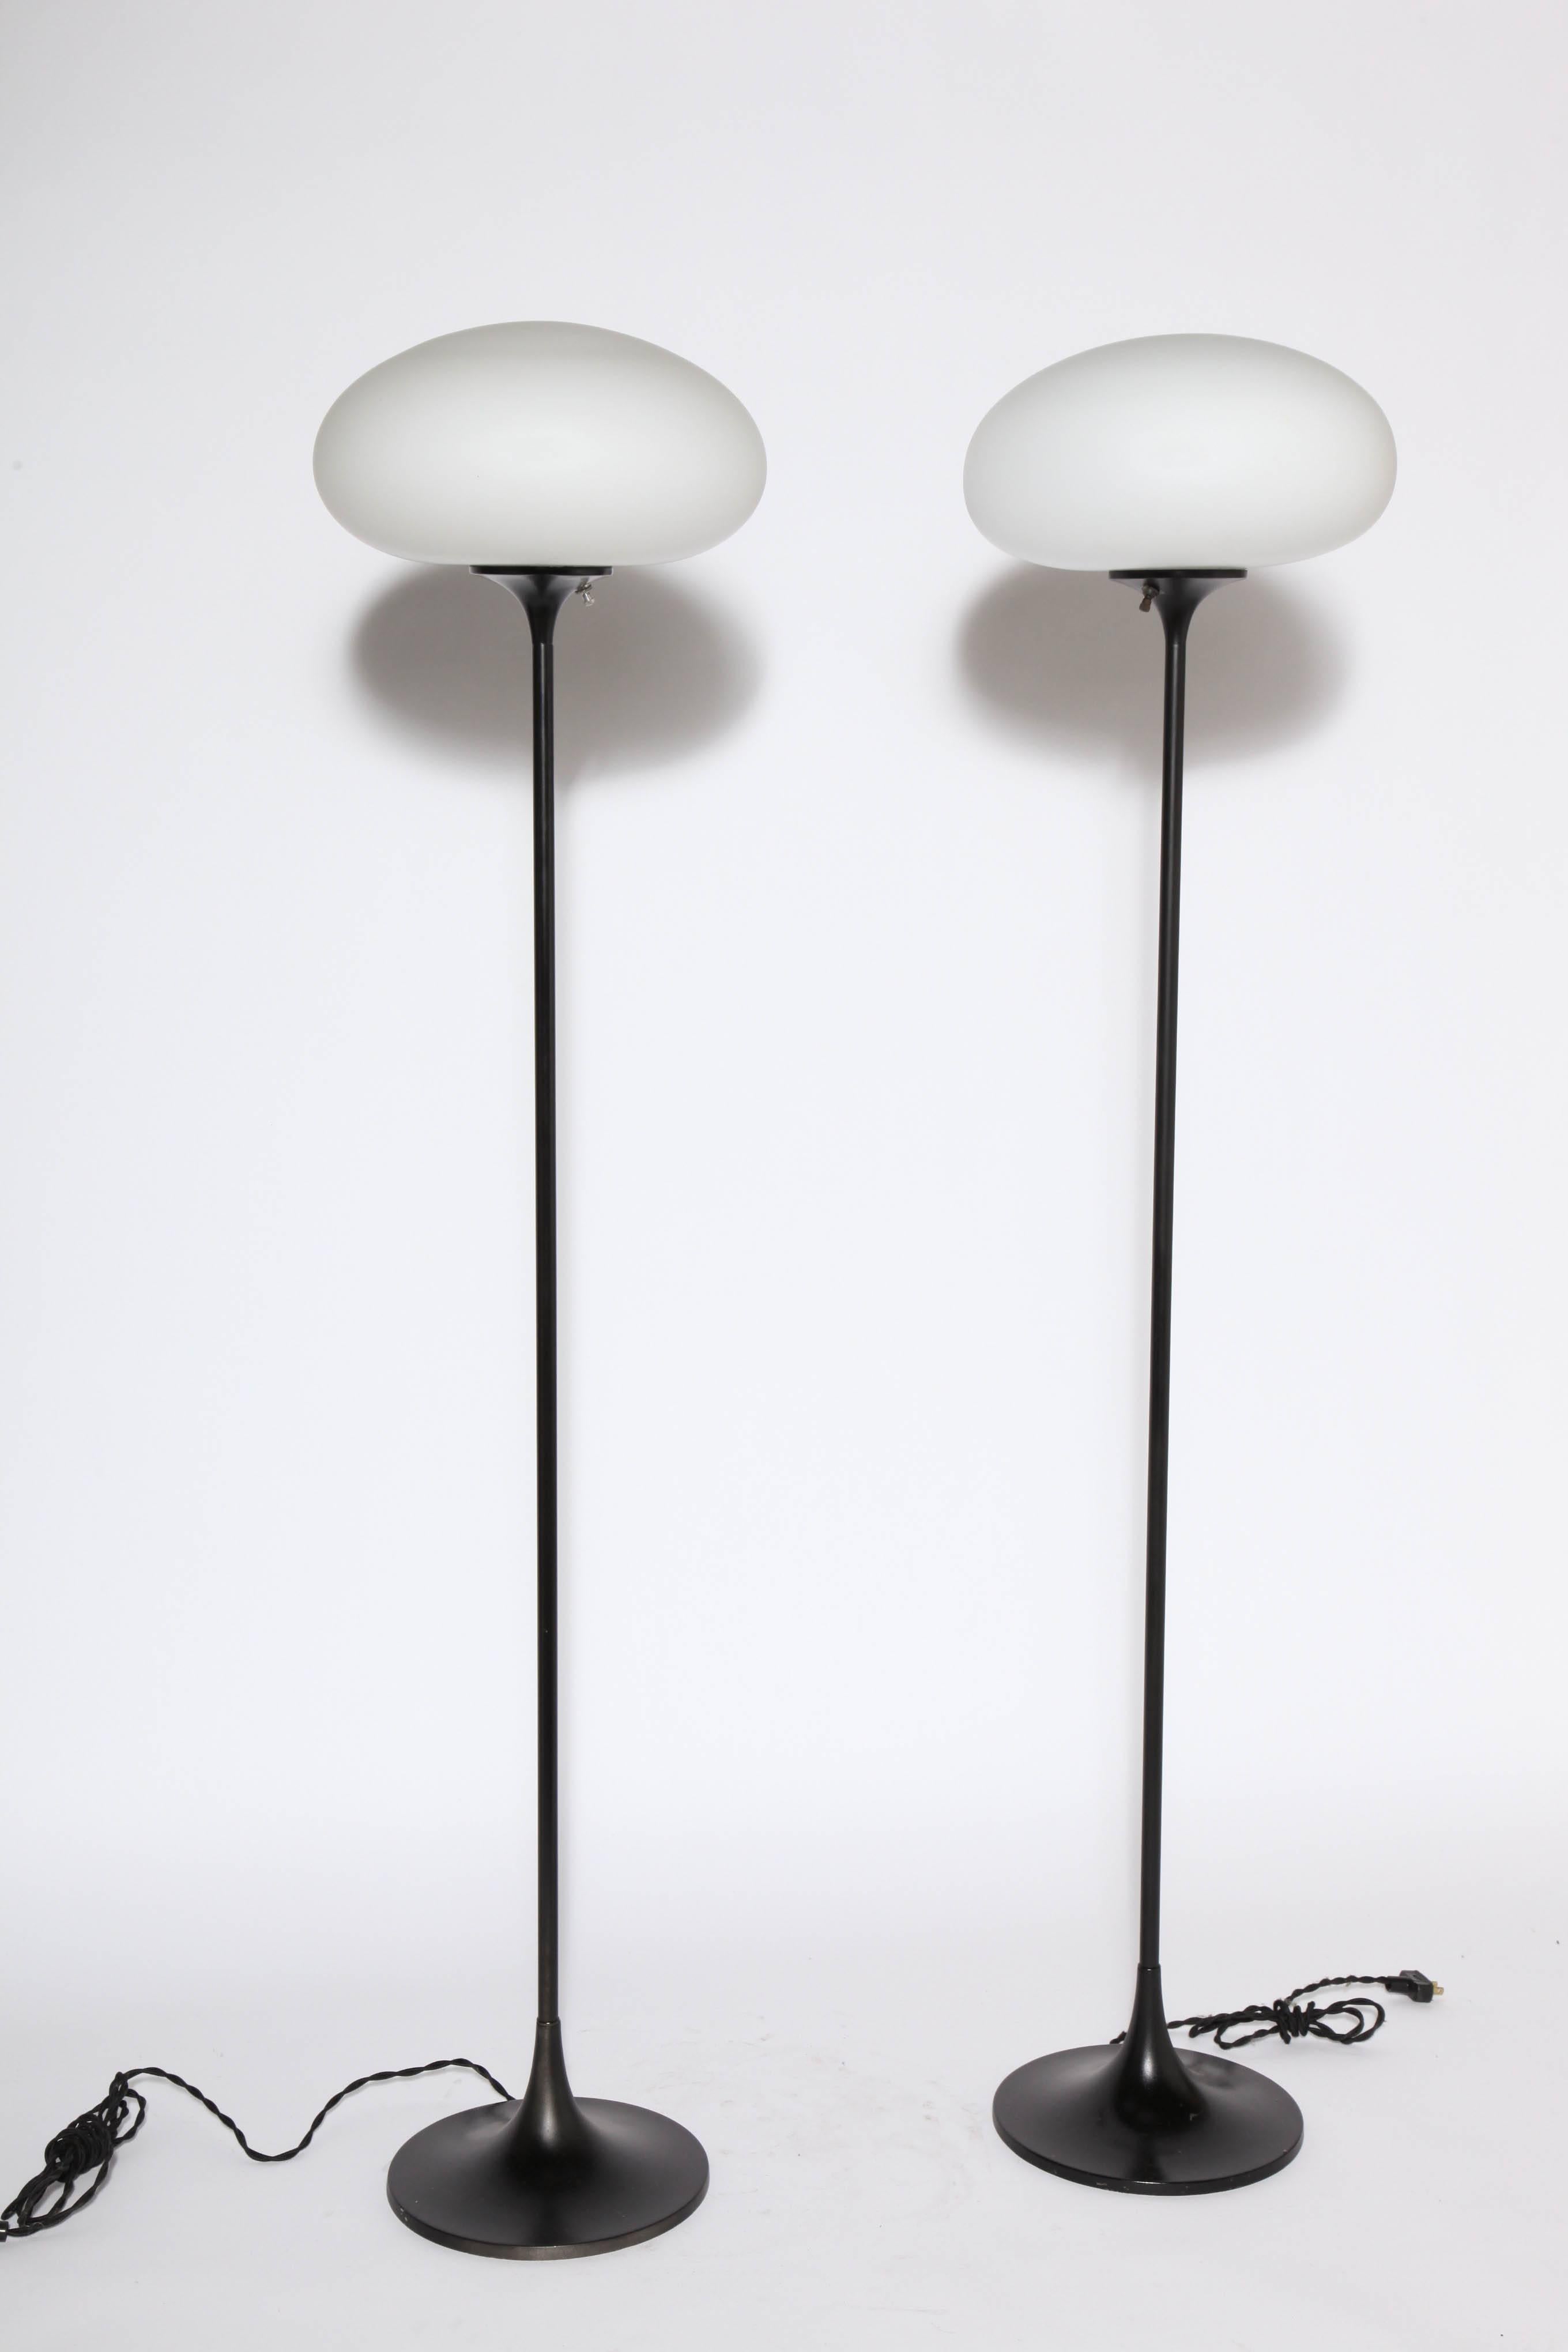 Pair of Bill Curry Mushroom Series Floor Lamps by Design Line Segundo, California. Featuring black enameled metal tubular stem, round 10D tulip base and original white frosted glass globes. Sculptural. California Modern. Rarity.